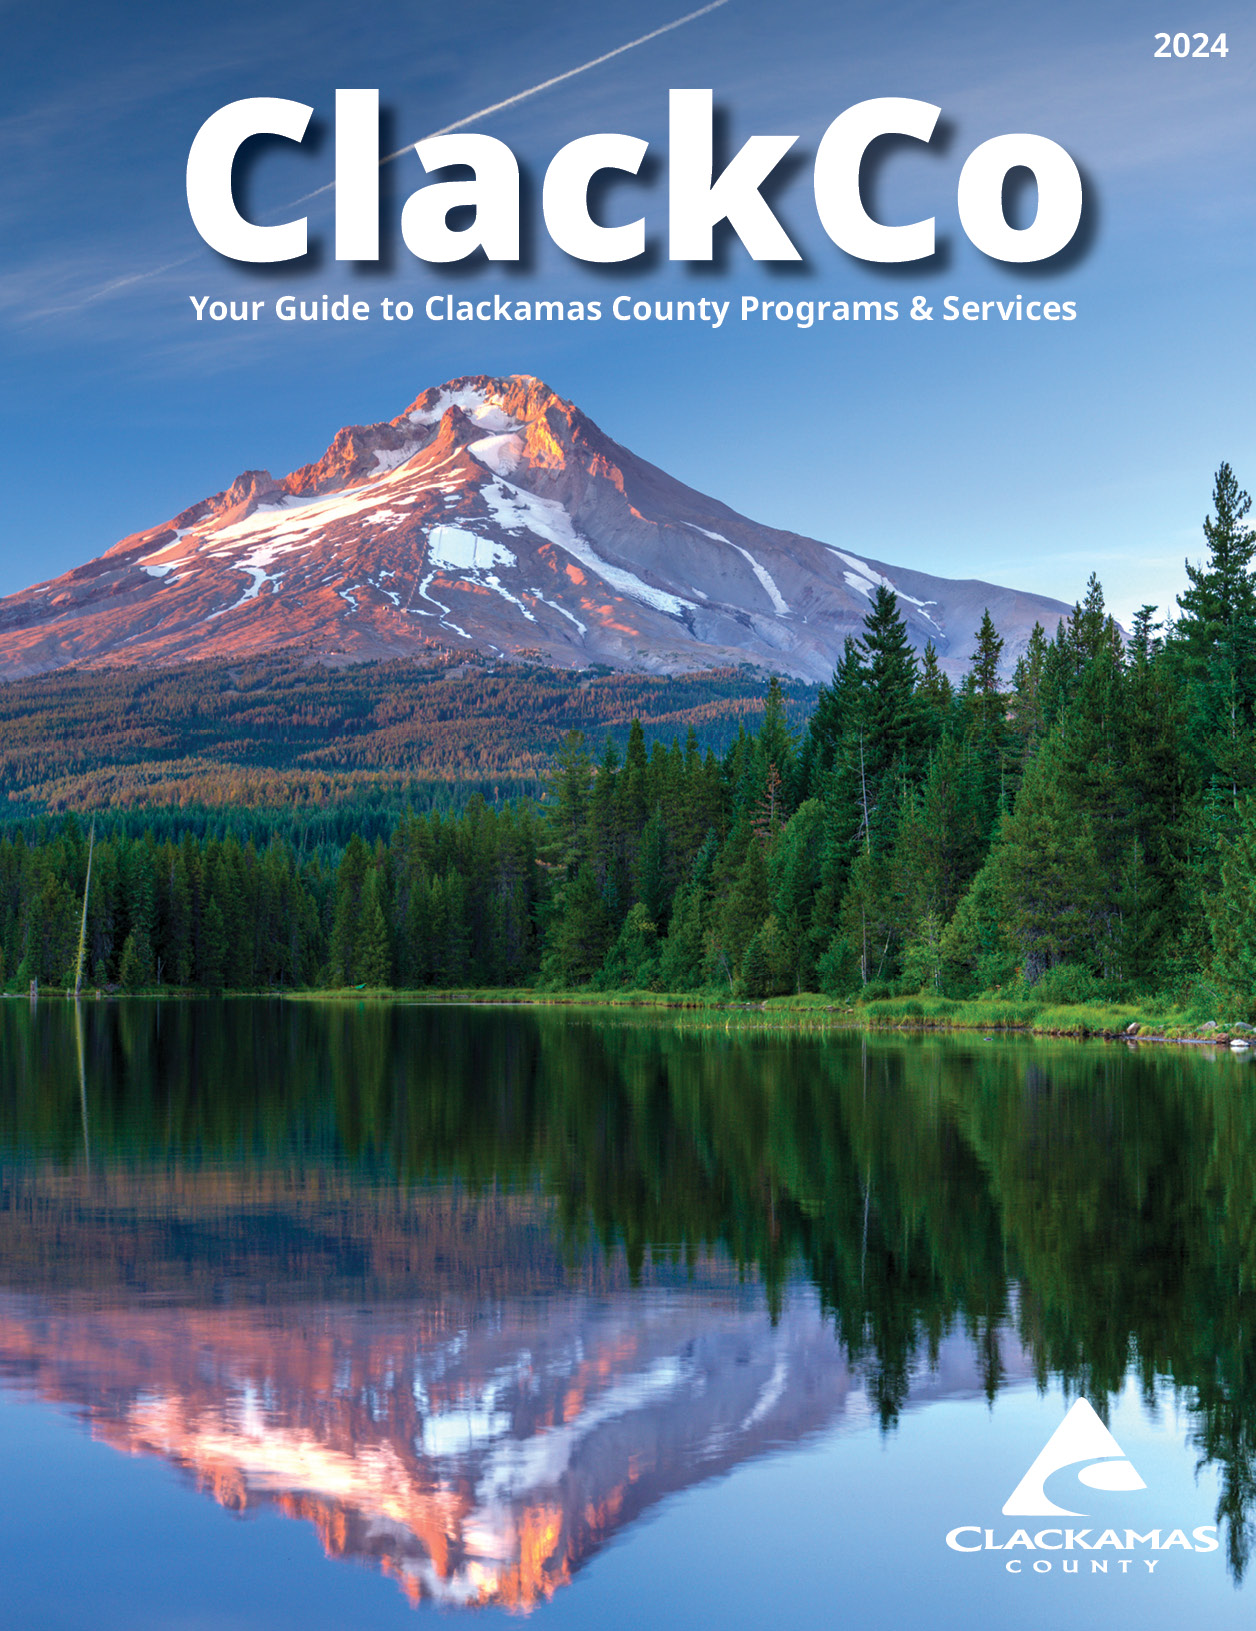 cover of magazine with Mt. Hood